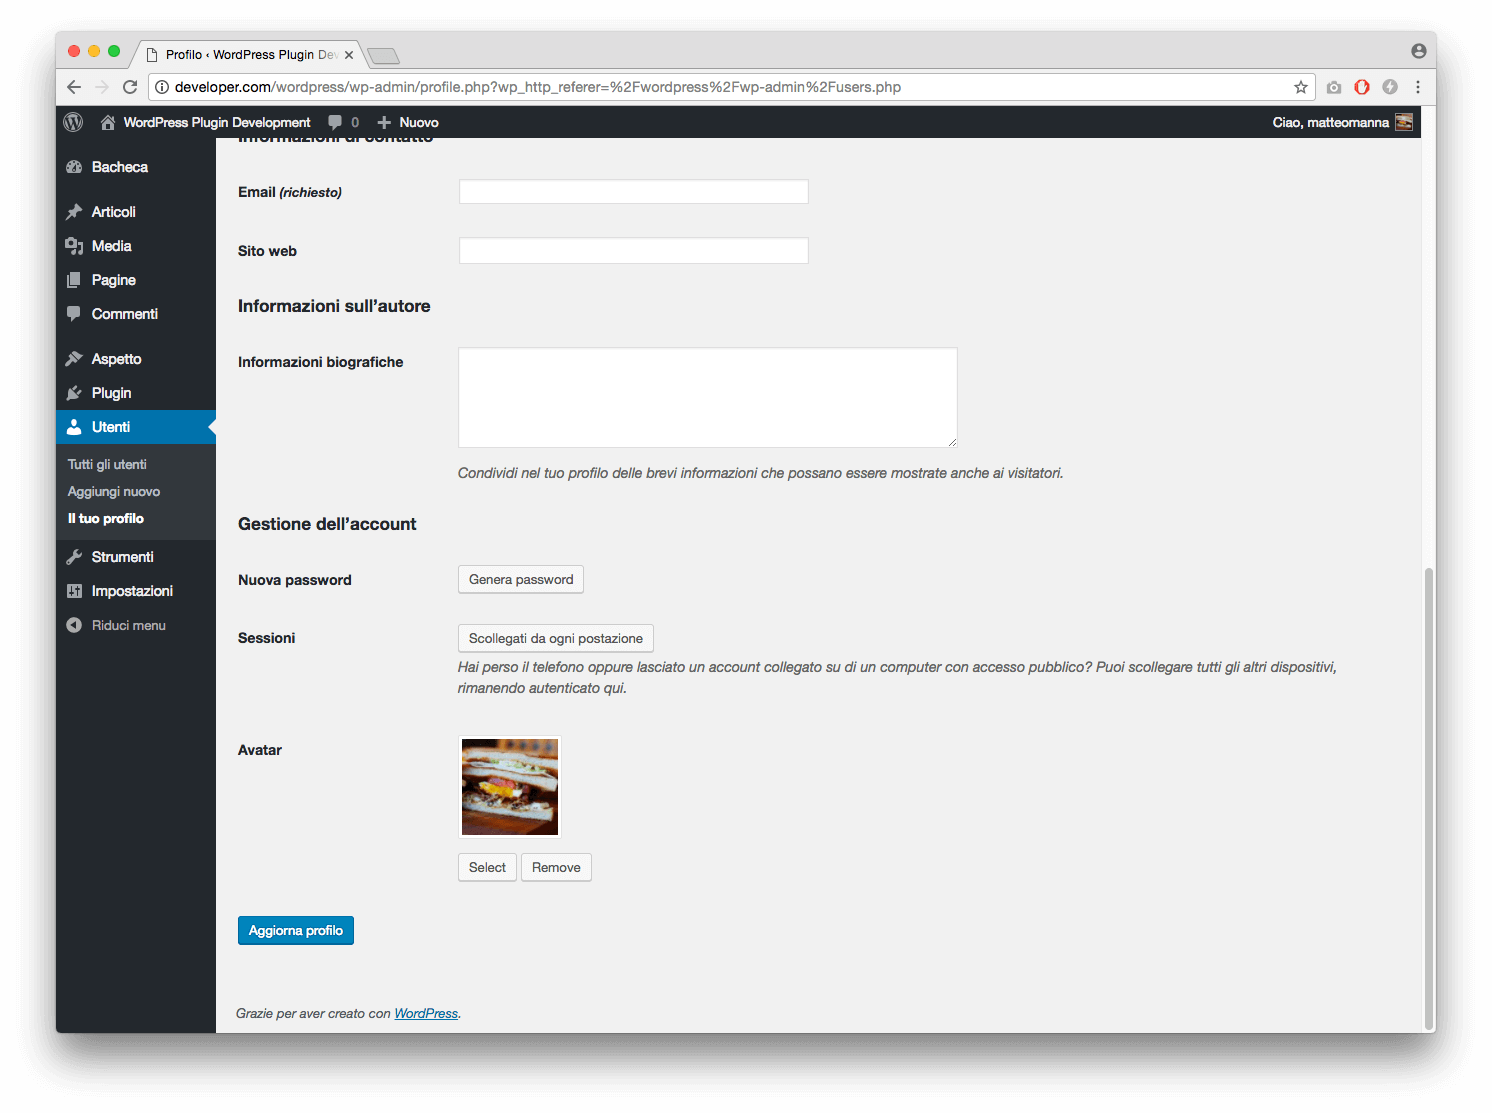 Sample view of the new option in the user page.